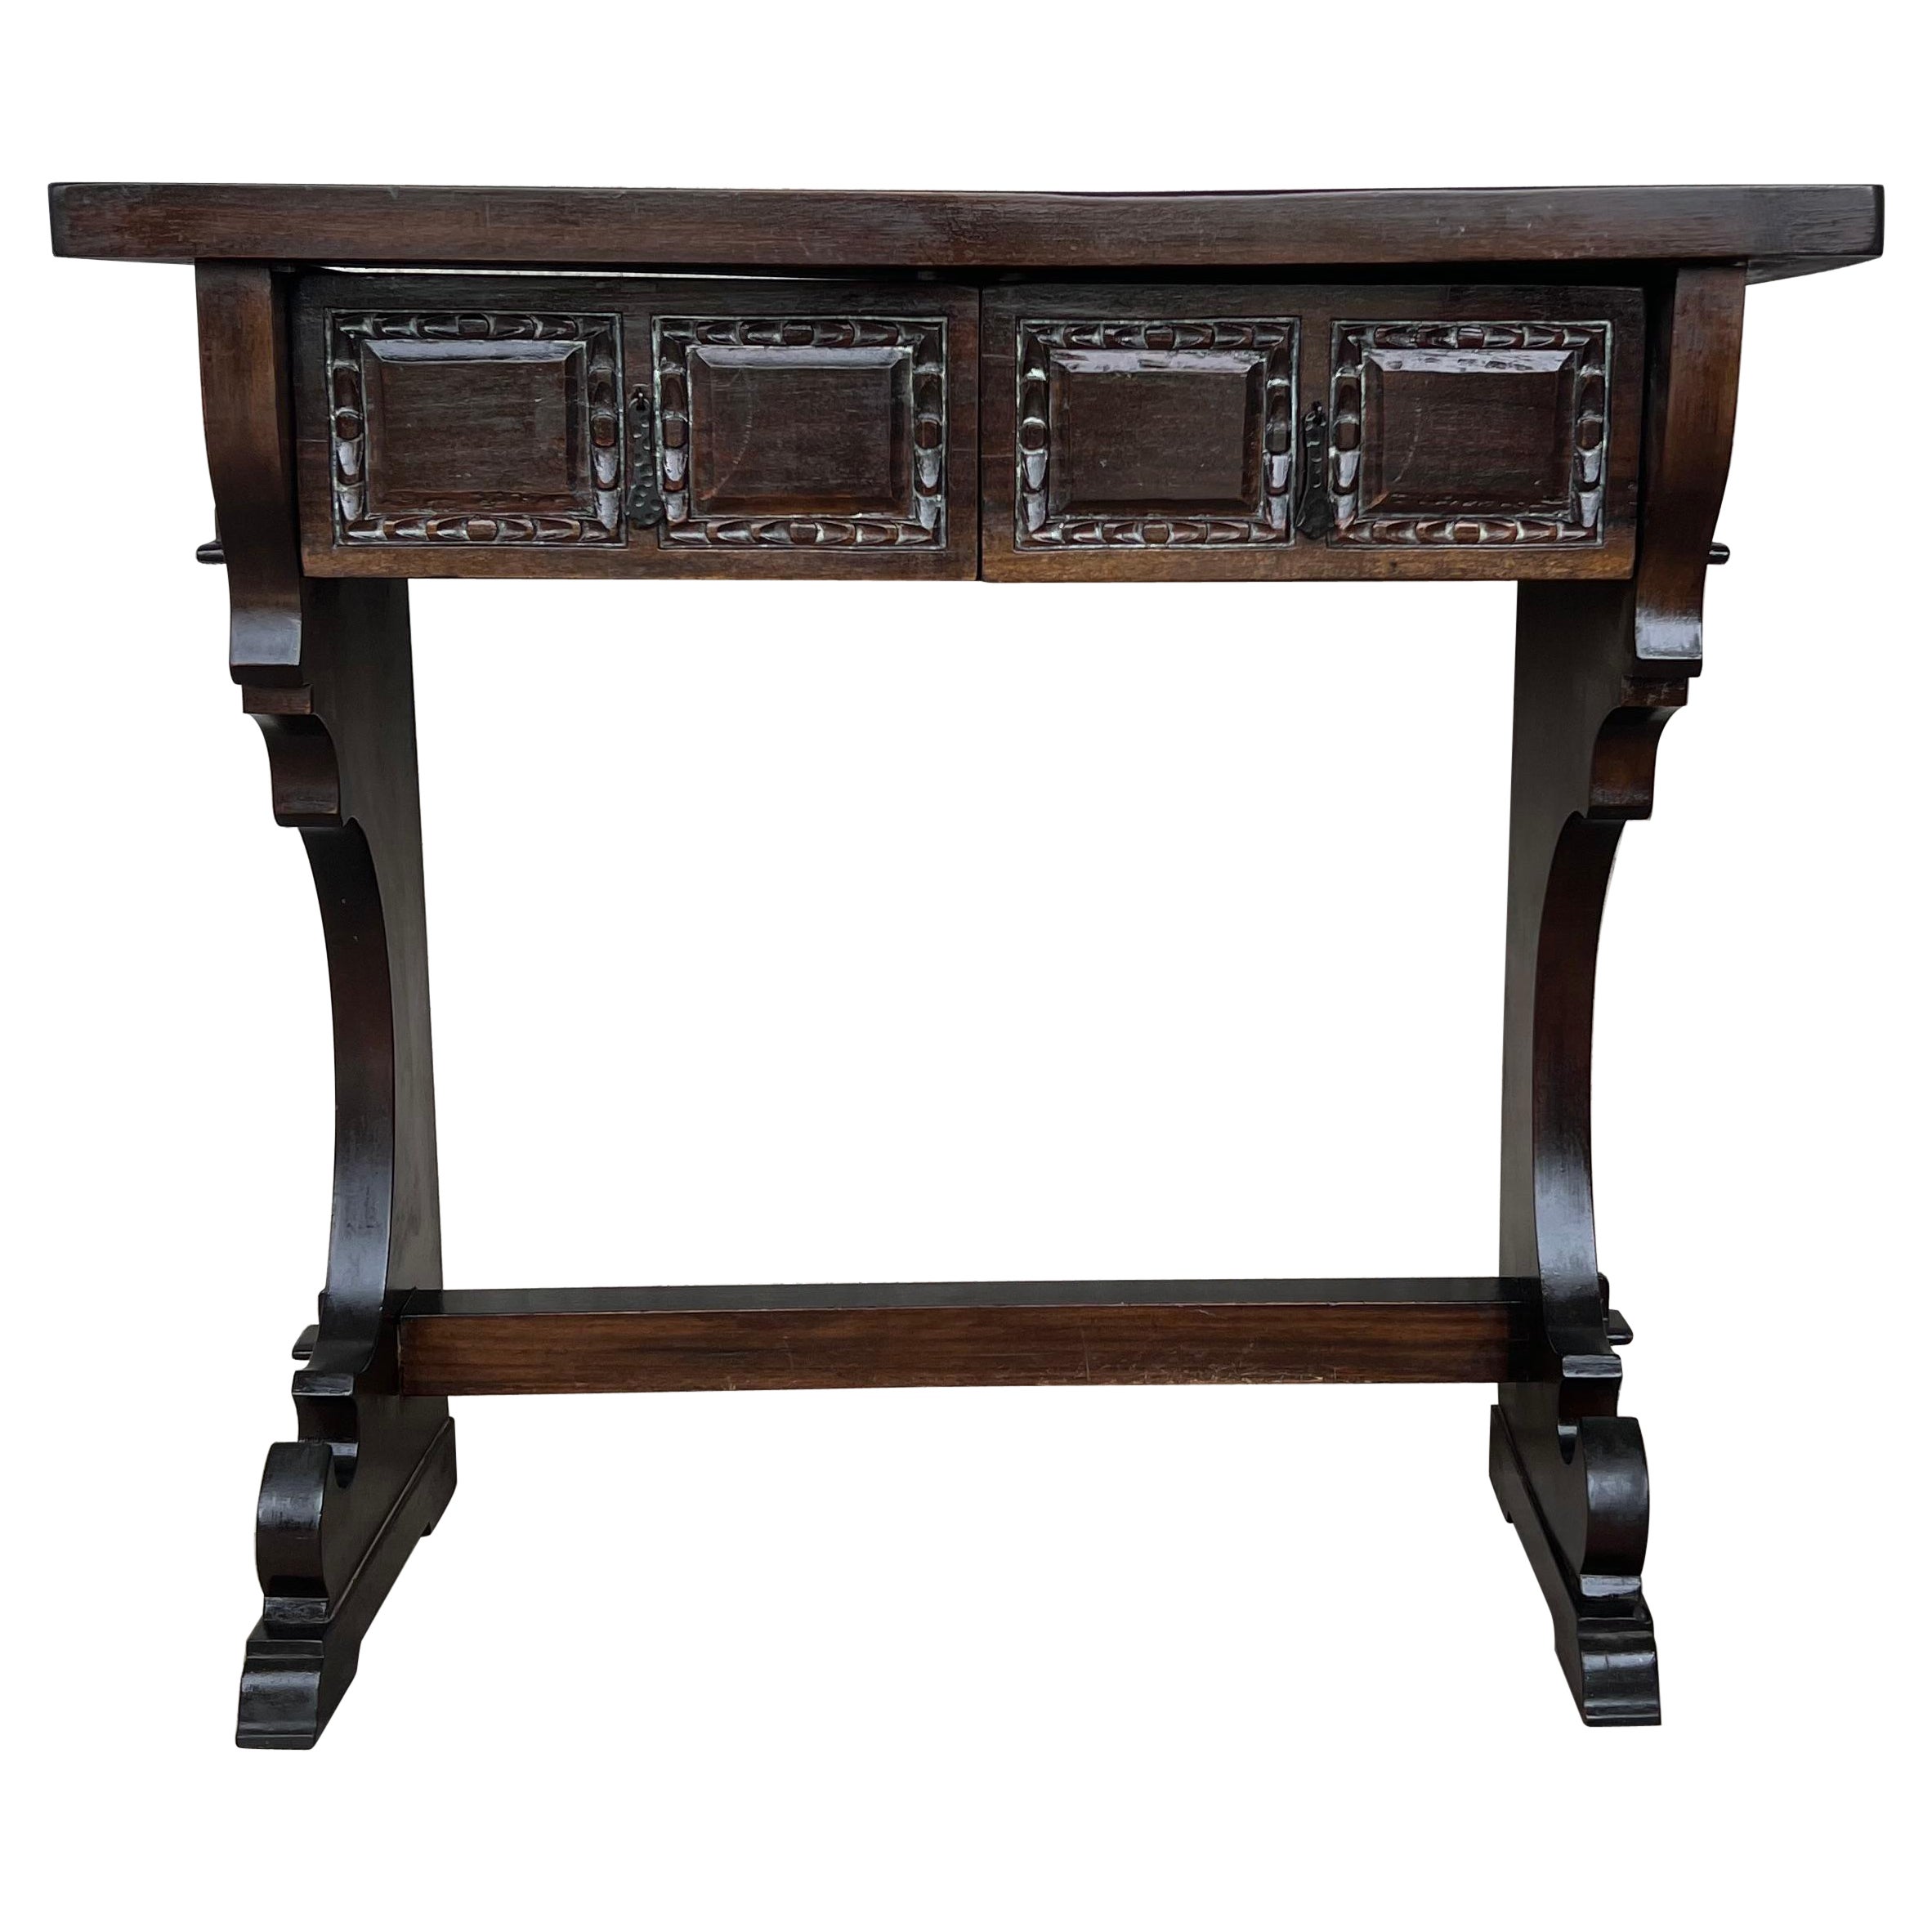 Spanish Colonial Narrow Console Table with Two Drawers with Iron Hardware